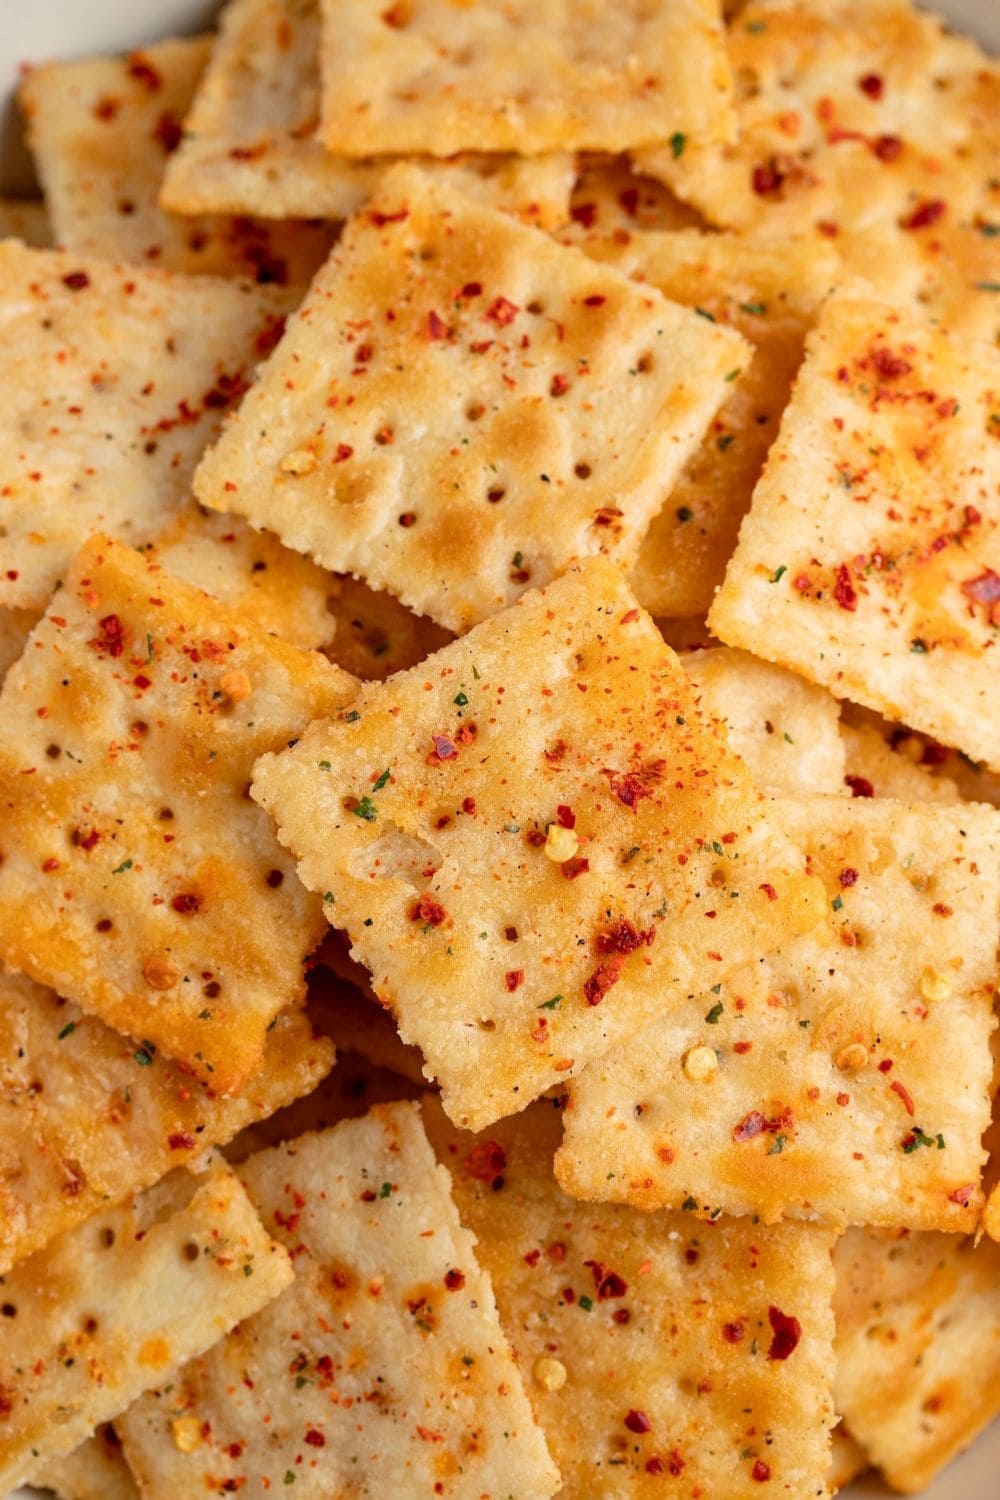 Spicy Saltine Crackers with Red Pepper Flakes